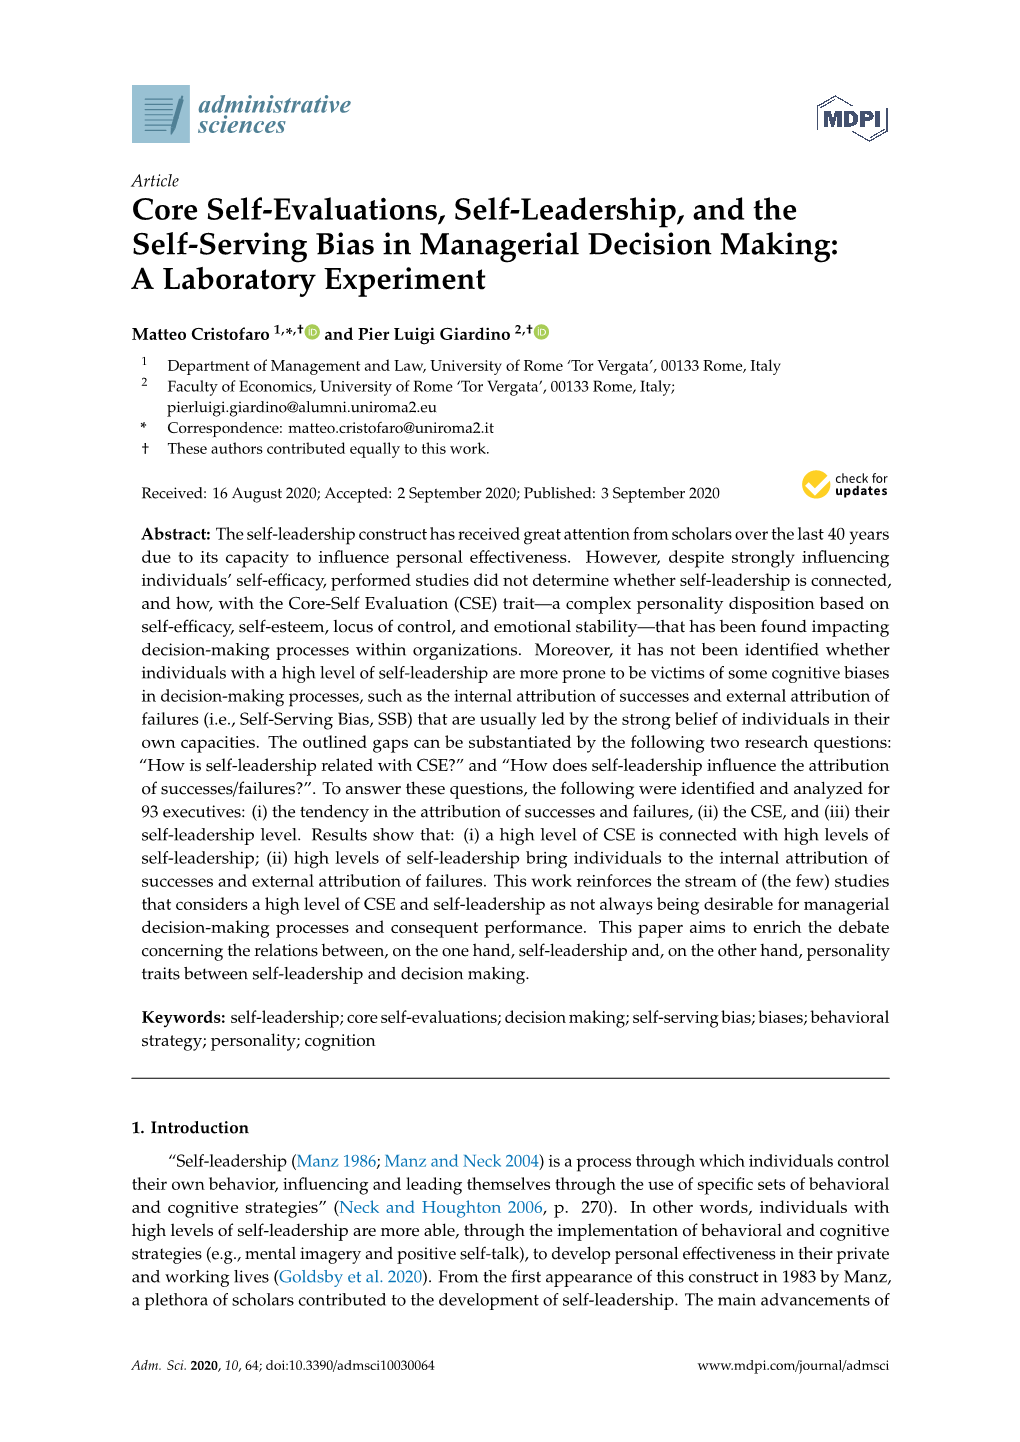 Core Self-Evaluations, Self-Leadership, and the Self-Serving Bias in Managerial Decision Making: a Laboratory Experiment